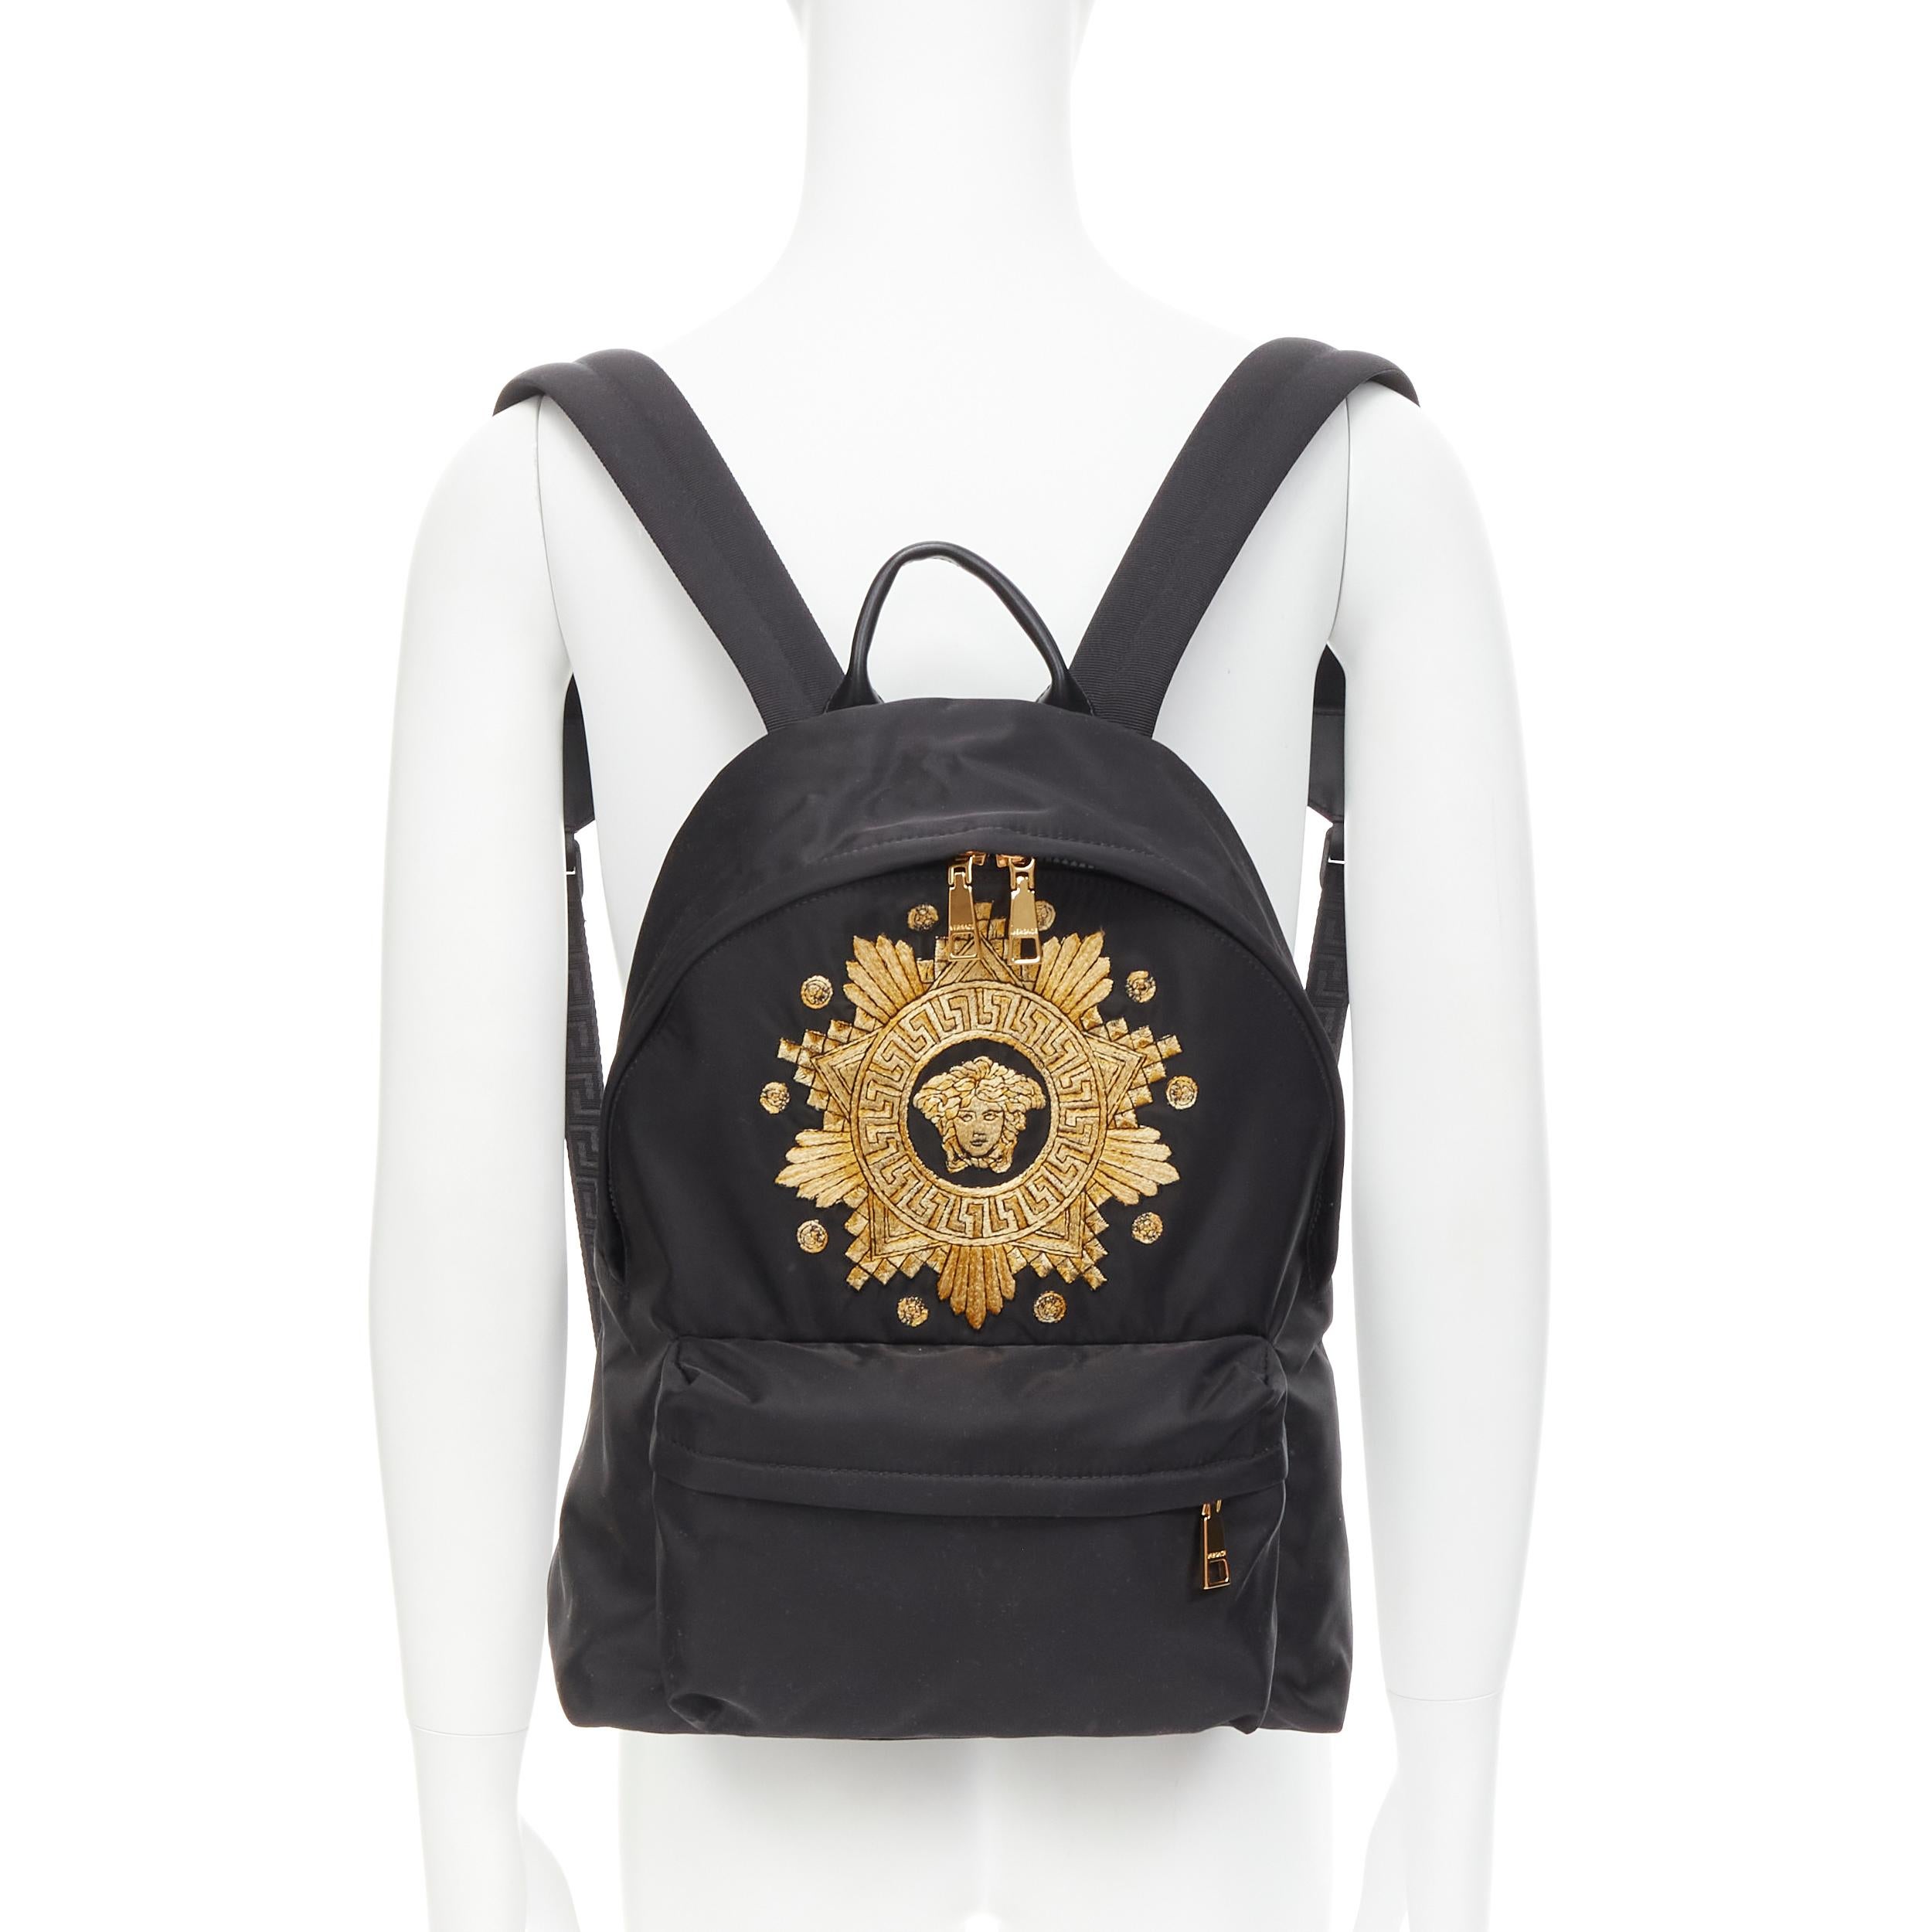 new VERSACE Medusa Western Starburst embroidered black nylon backpack 
Reference: TGAS/C00268 
Brand: Versace 
Designer: Donatella Versace 
Model: DFZ5350 DRINY3 DNOOH 
Material: Nylon 
Color: Black 
Pattern: Solid 
Closure: Embroidered 
Extra